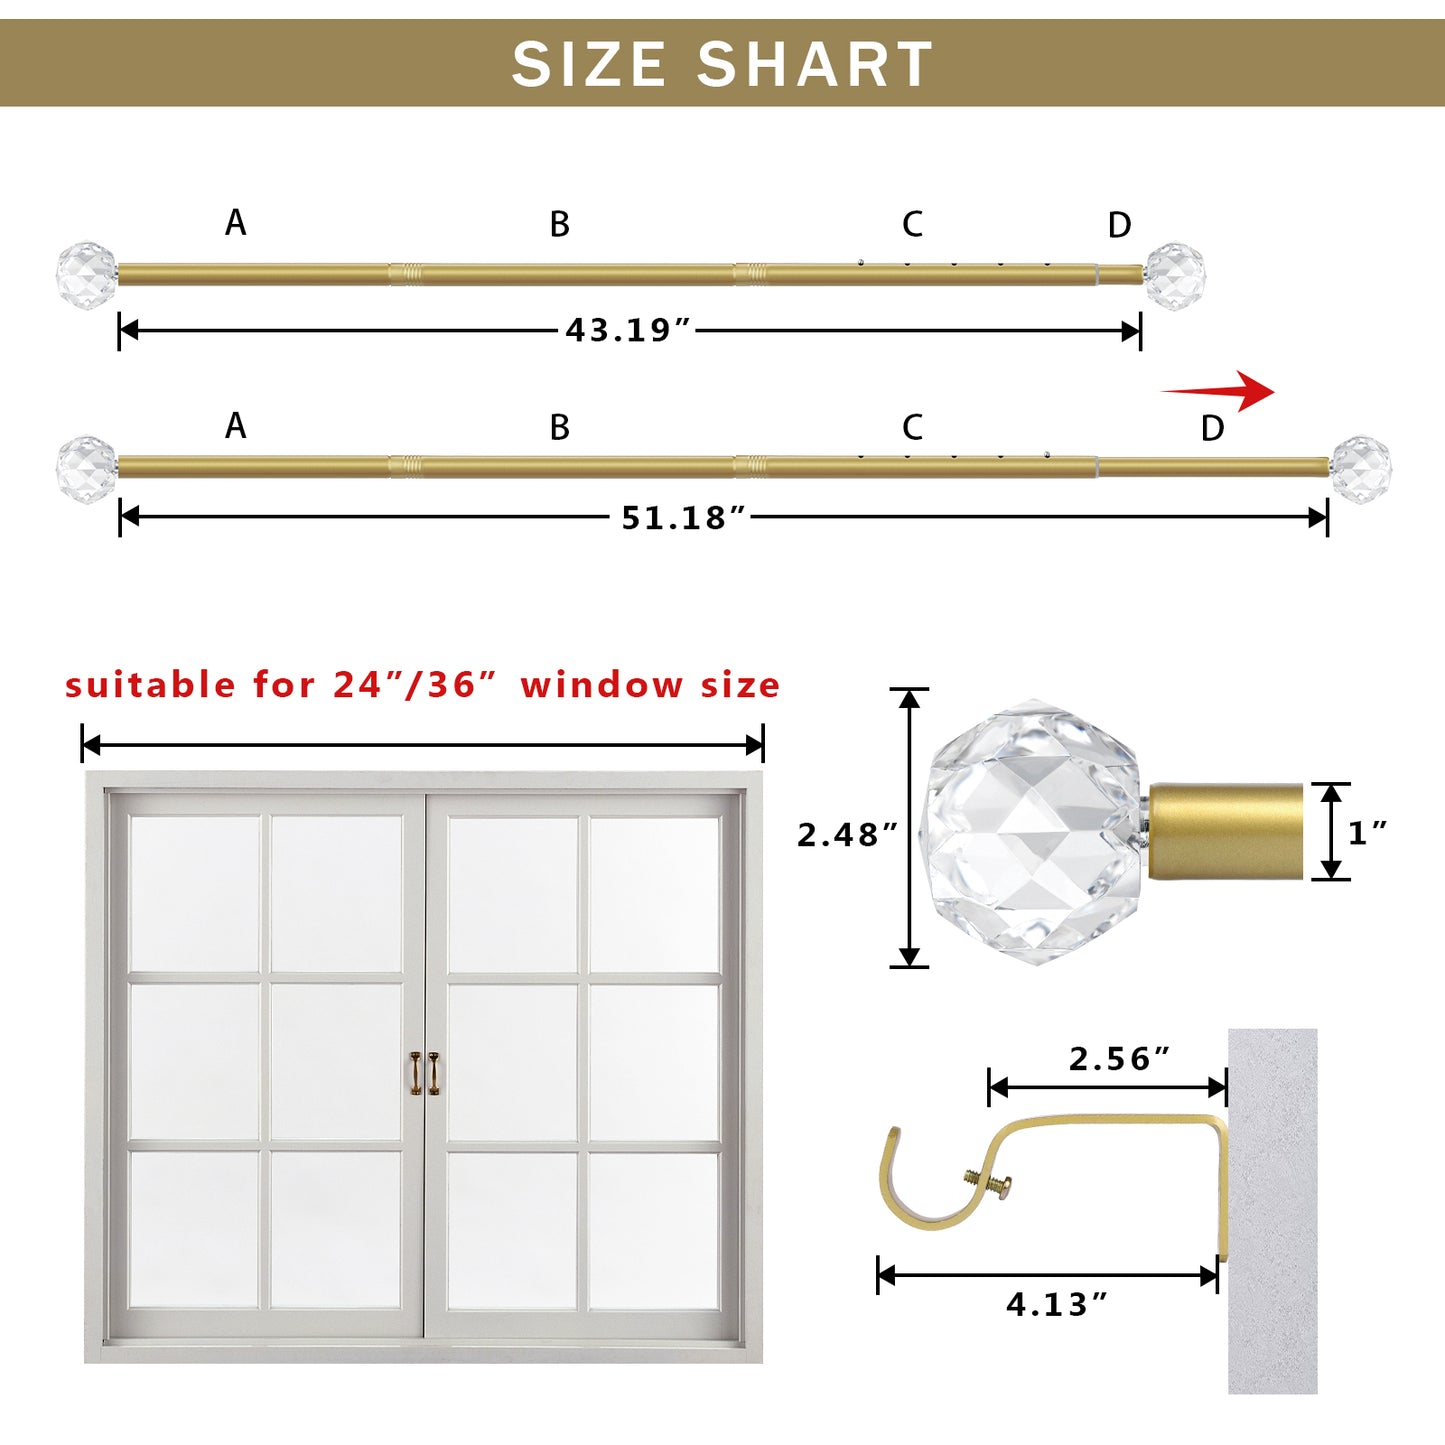 1 Inch Diameter Adjustable Window Curtain Rod Length from 43 to 51 Inch, with Acrylic Diamond Finials